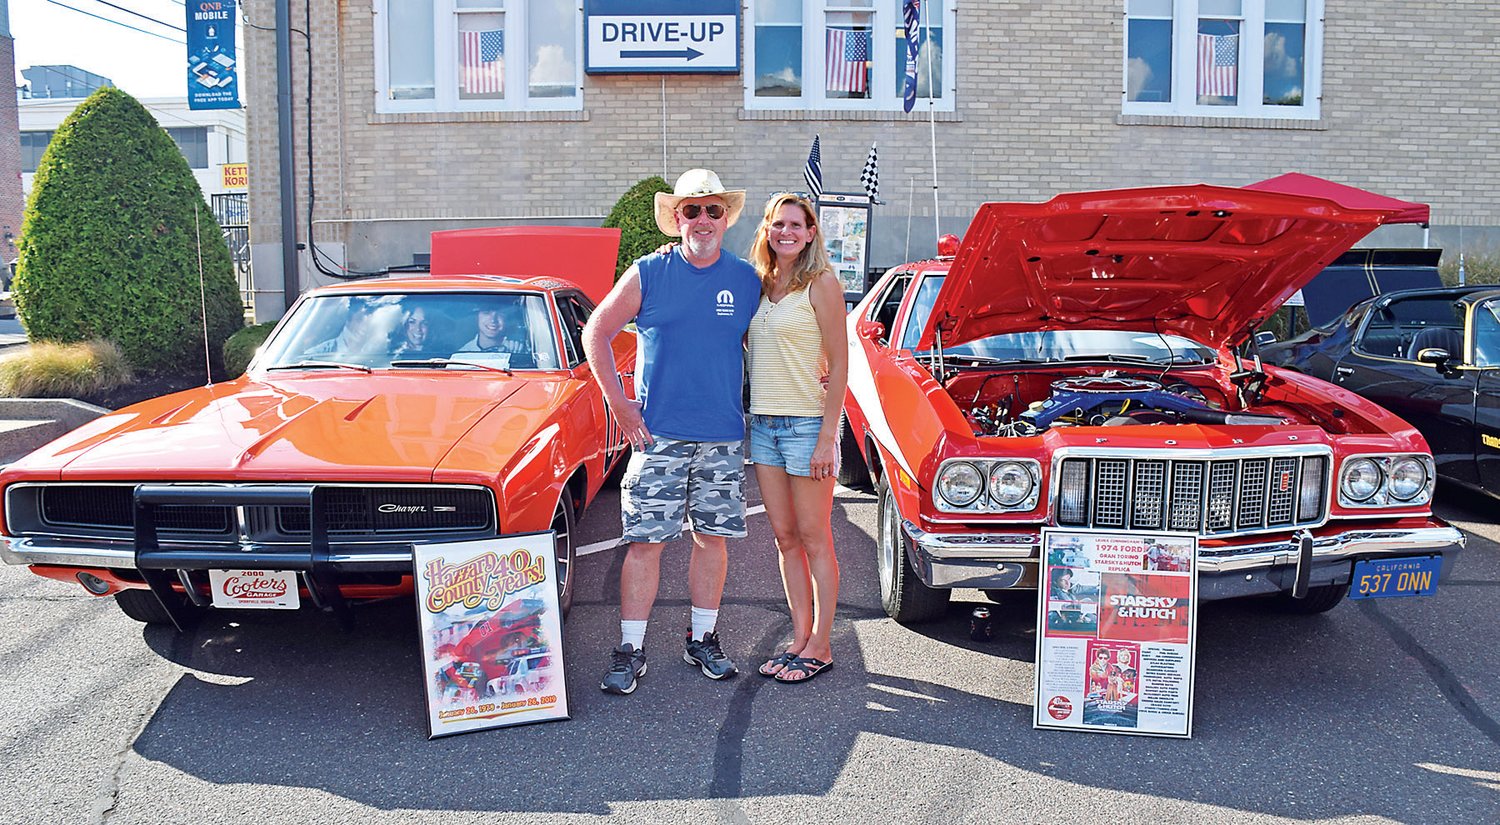 Jim and Laura Cunningham of Quakertown with his General Lee Dodge Charger 1969 and her “Starsky and Hutch” replica Ford Gran Torino 1974.